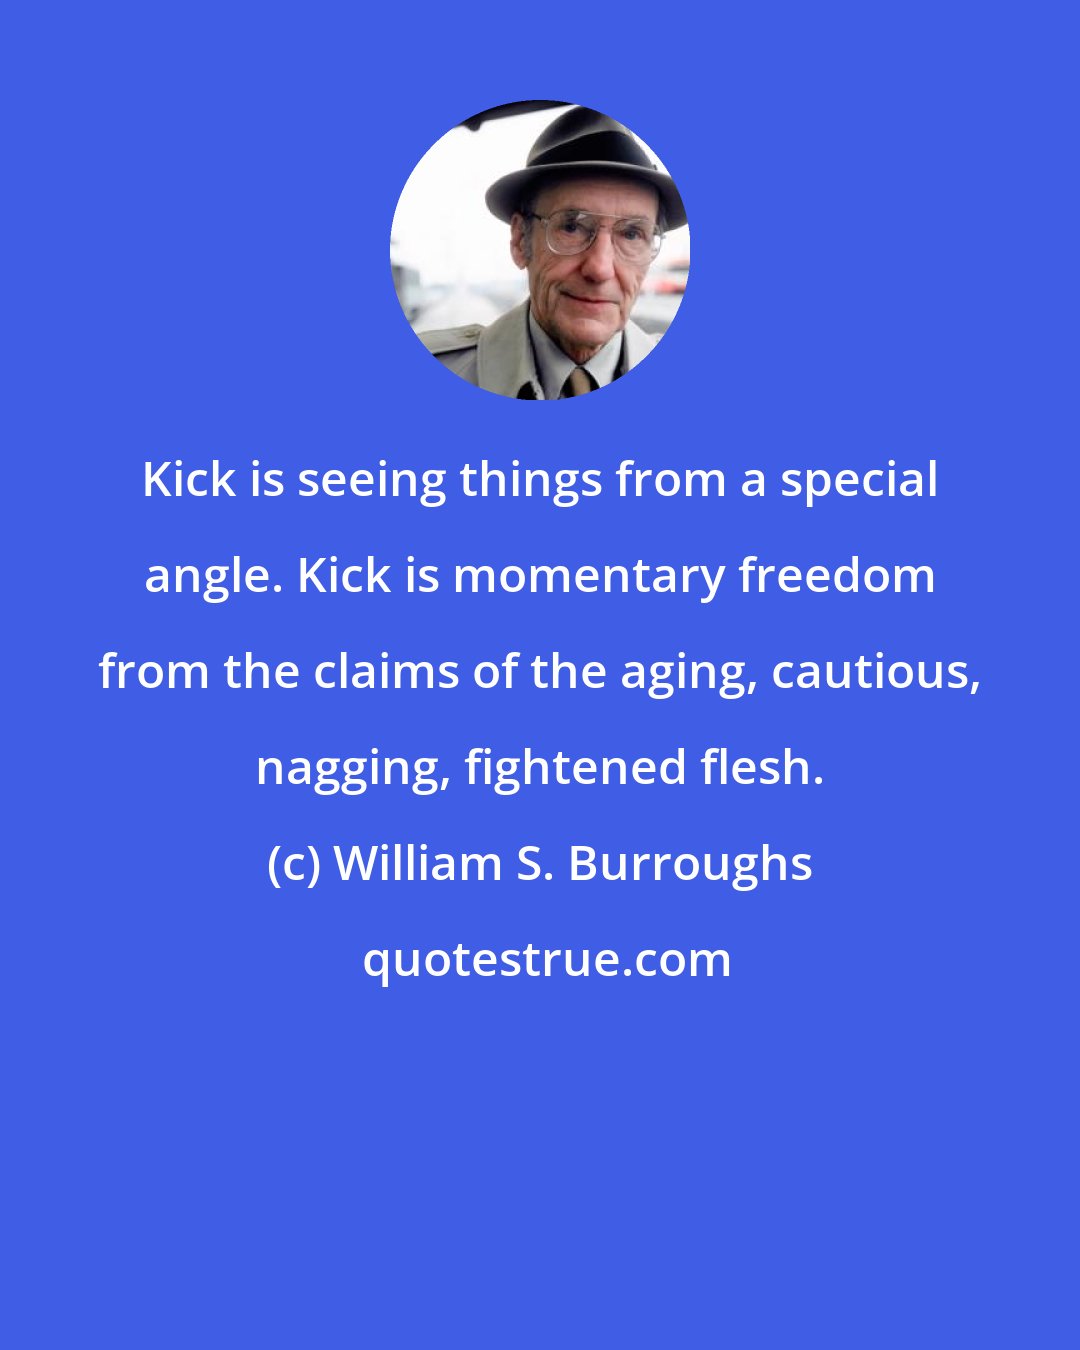 William S. Burroughs: Kick is seeing things from a special angle. Kick is momentary freedom from the claims of the aging, cautious, nagging, fightened flesh.